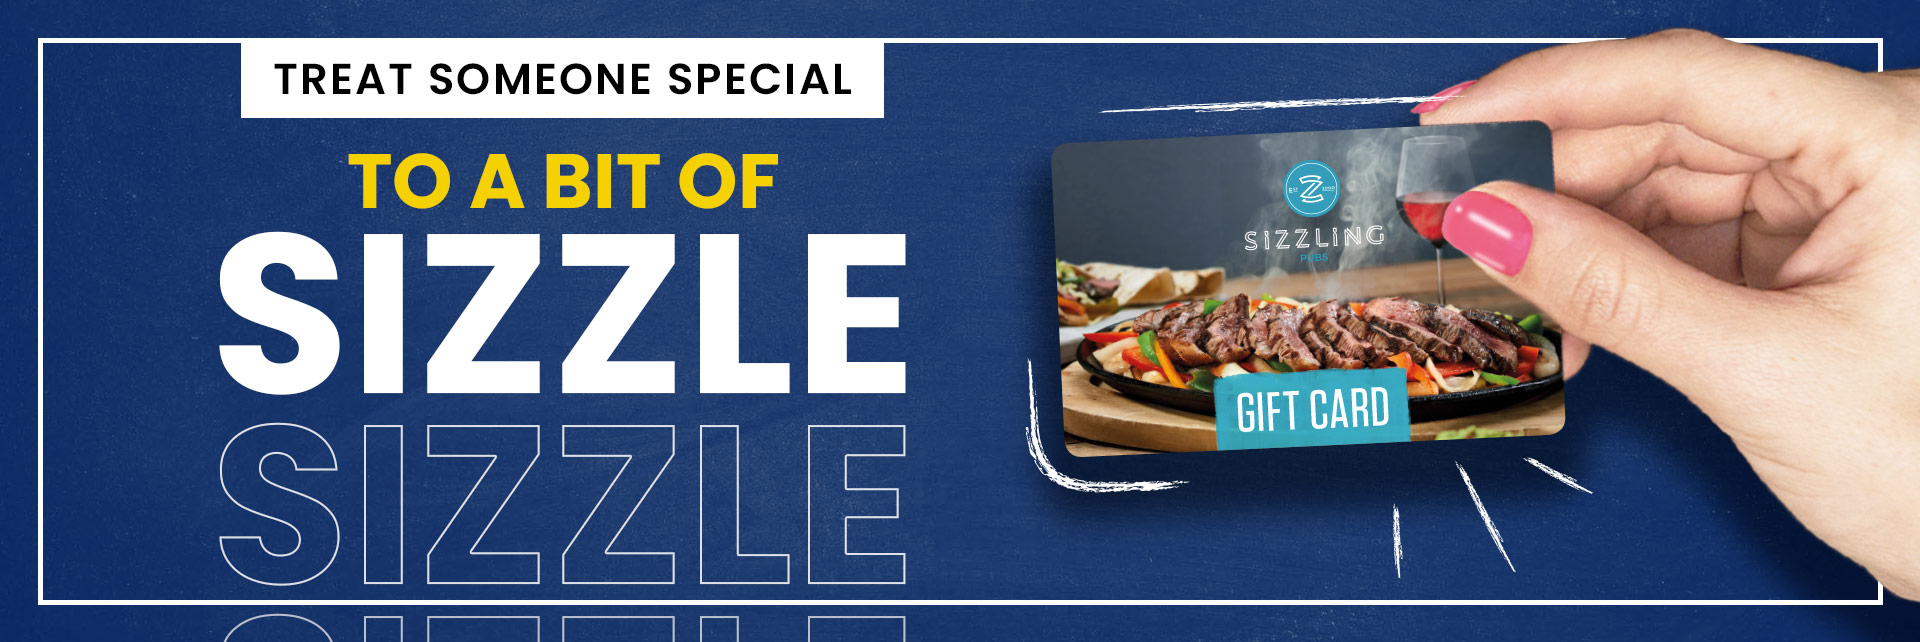 Sizzling Pubs Gift Card at Cricketers in Grimsby